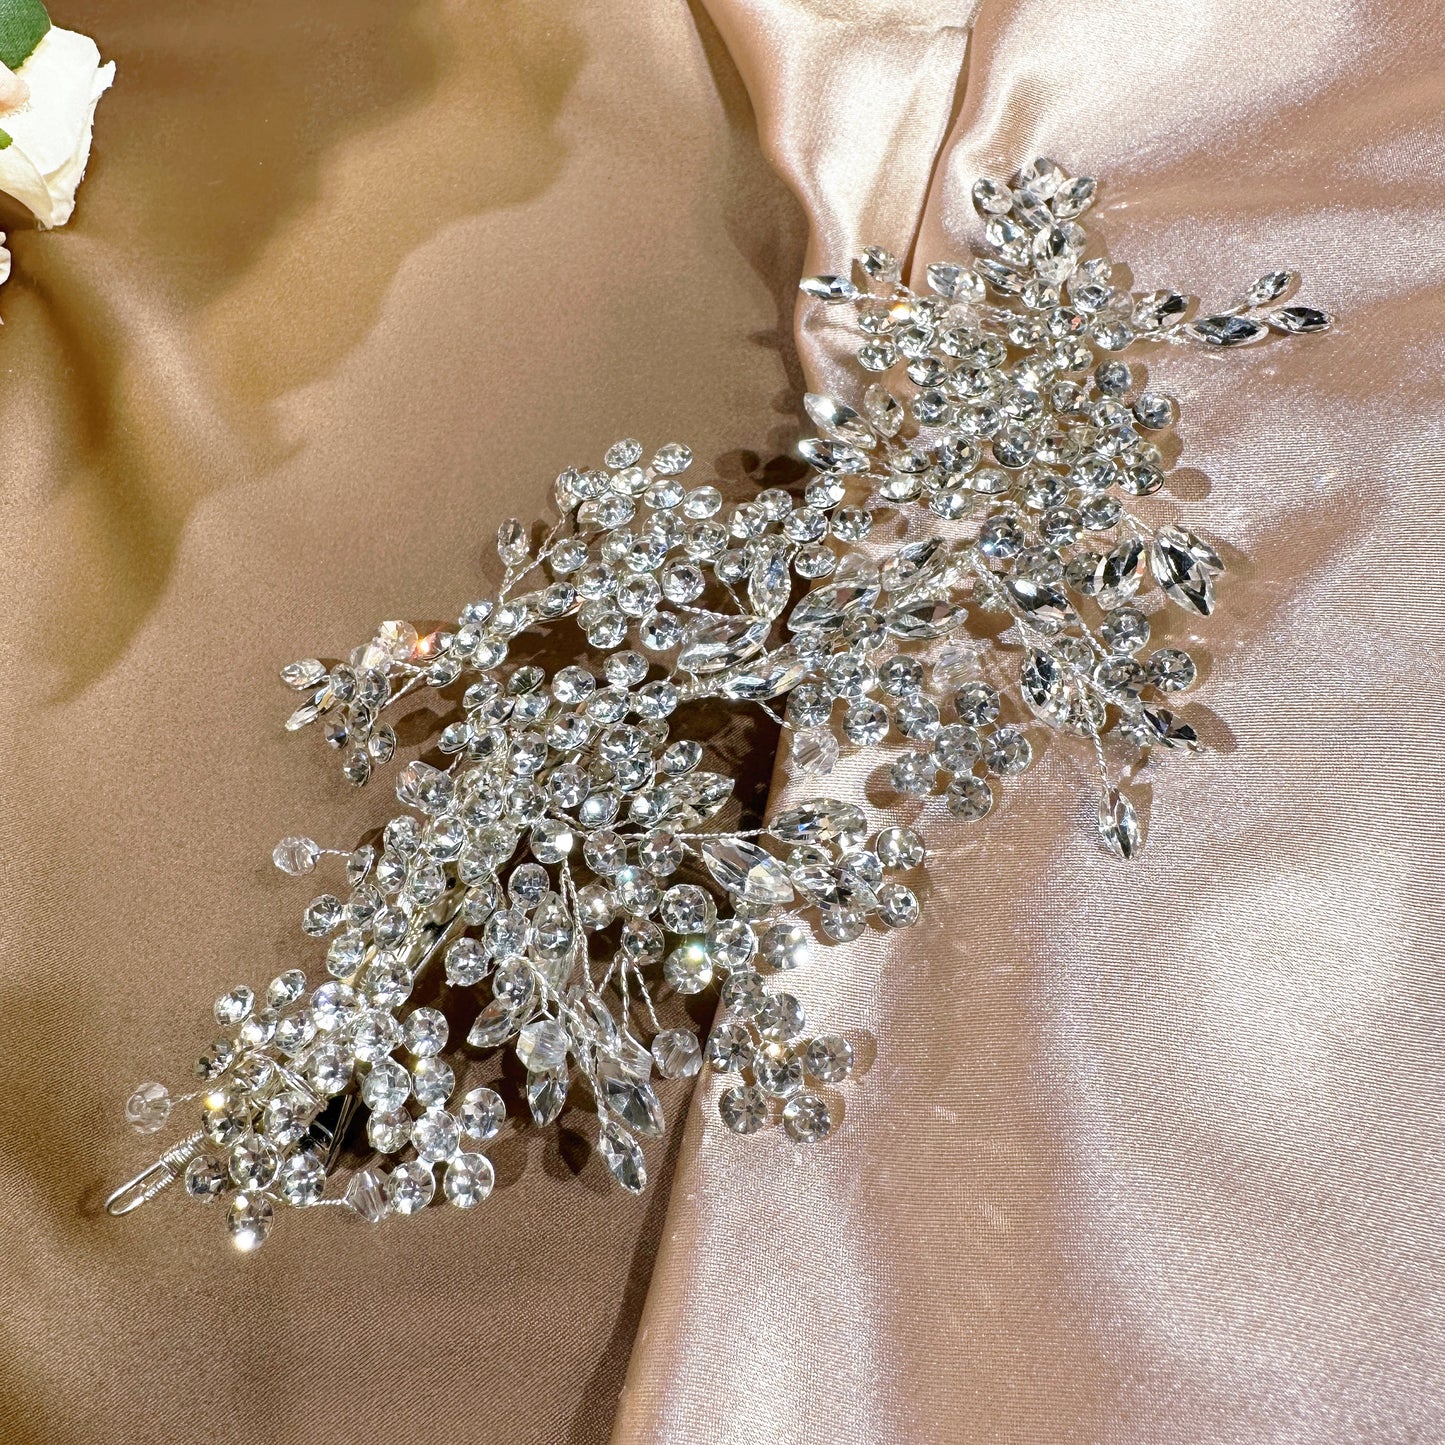 Get ready to dazzle with our Beautiful Rhinestone Headpiece (Gold & Silver)